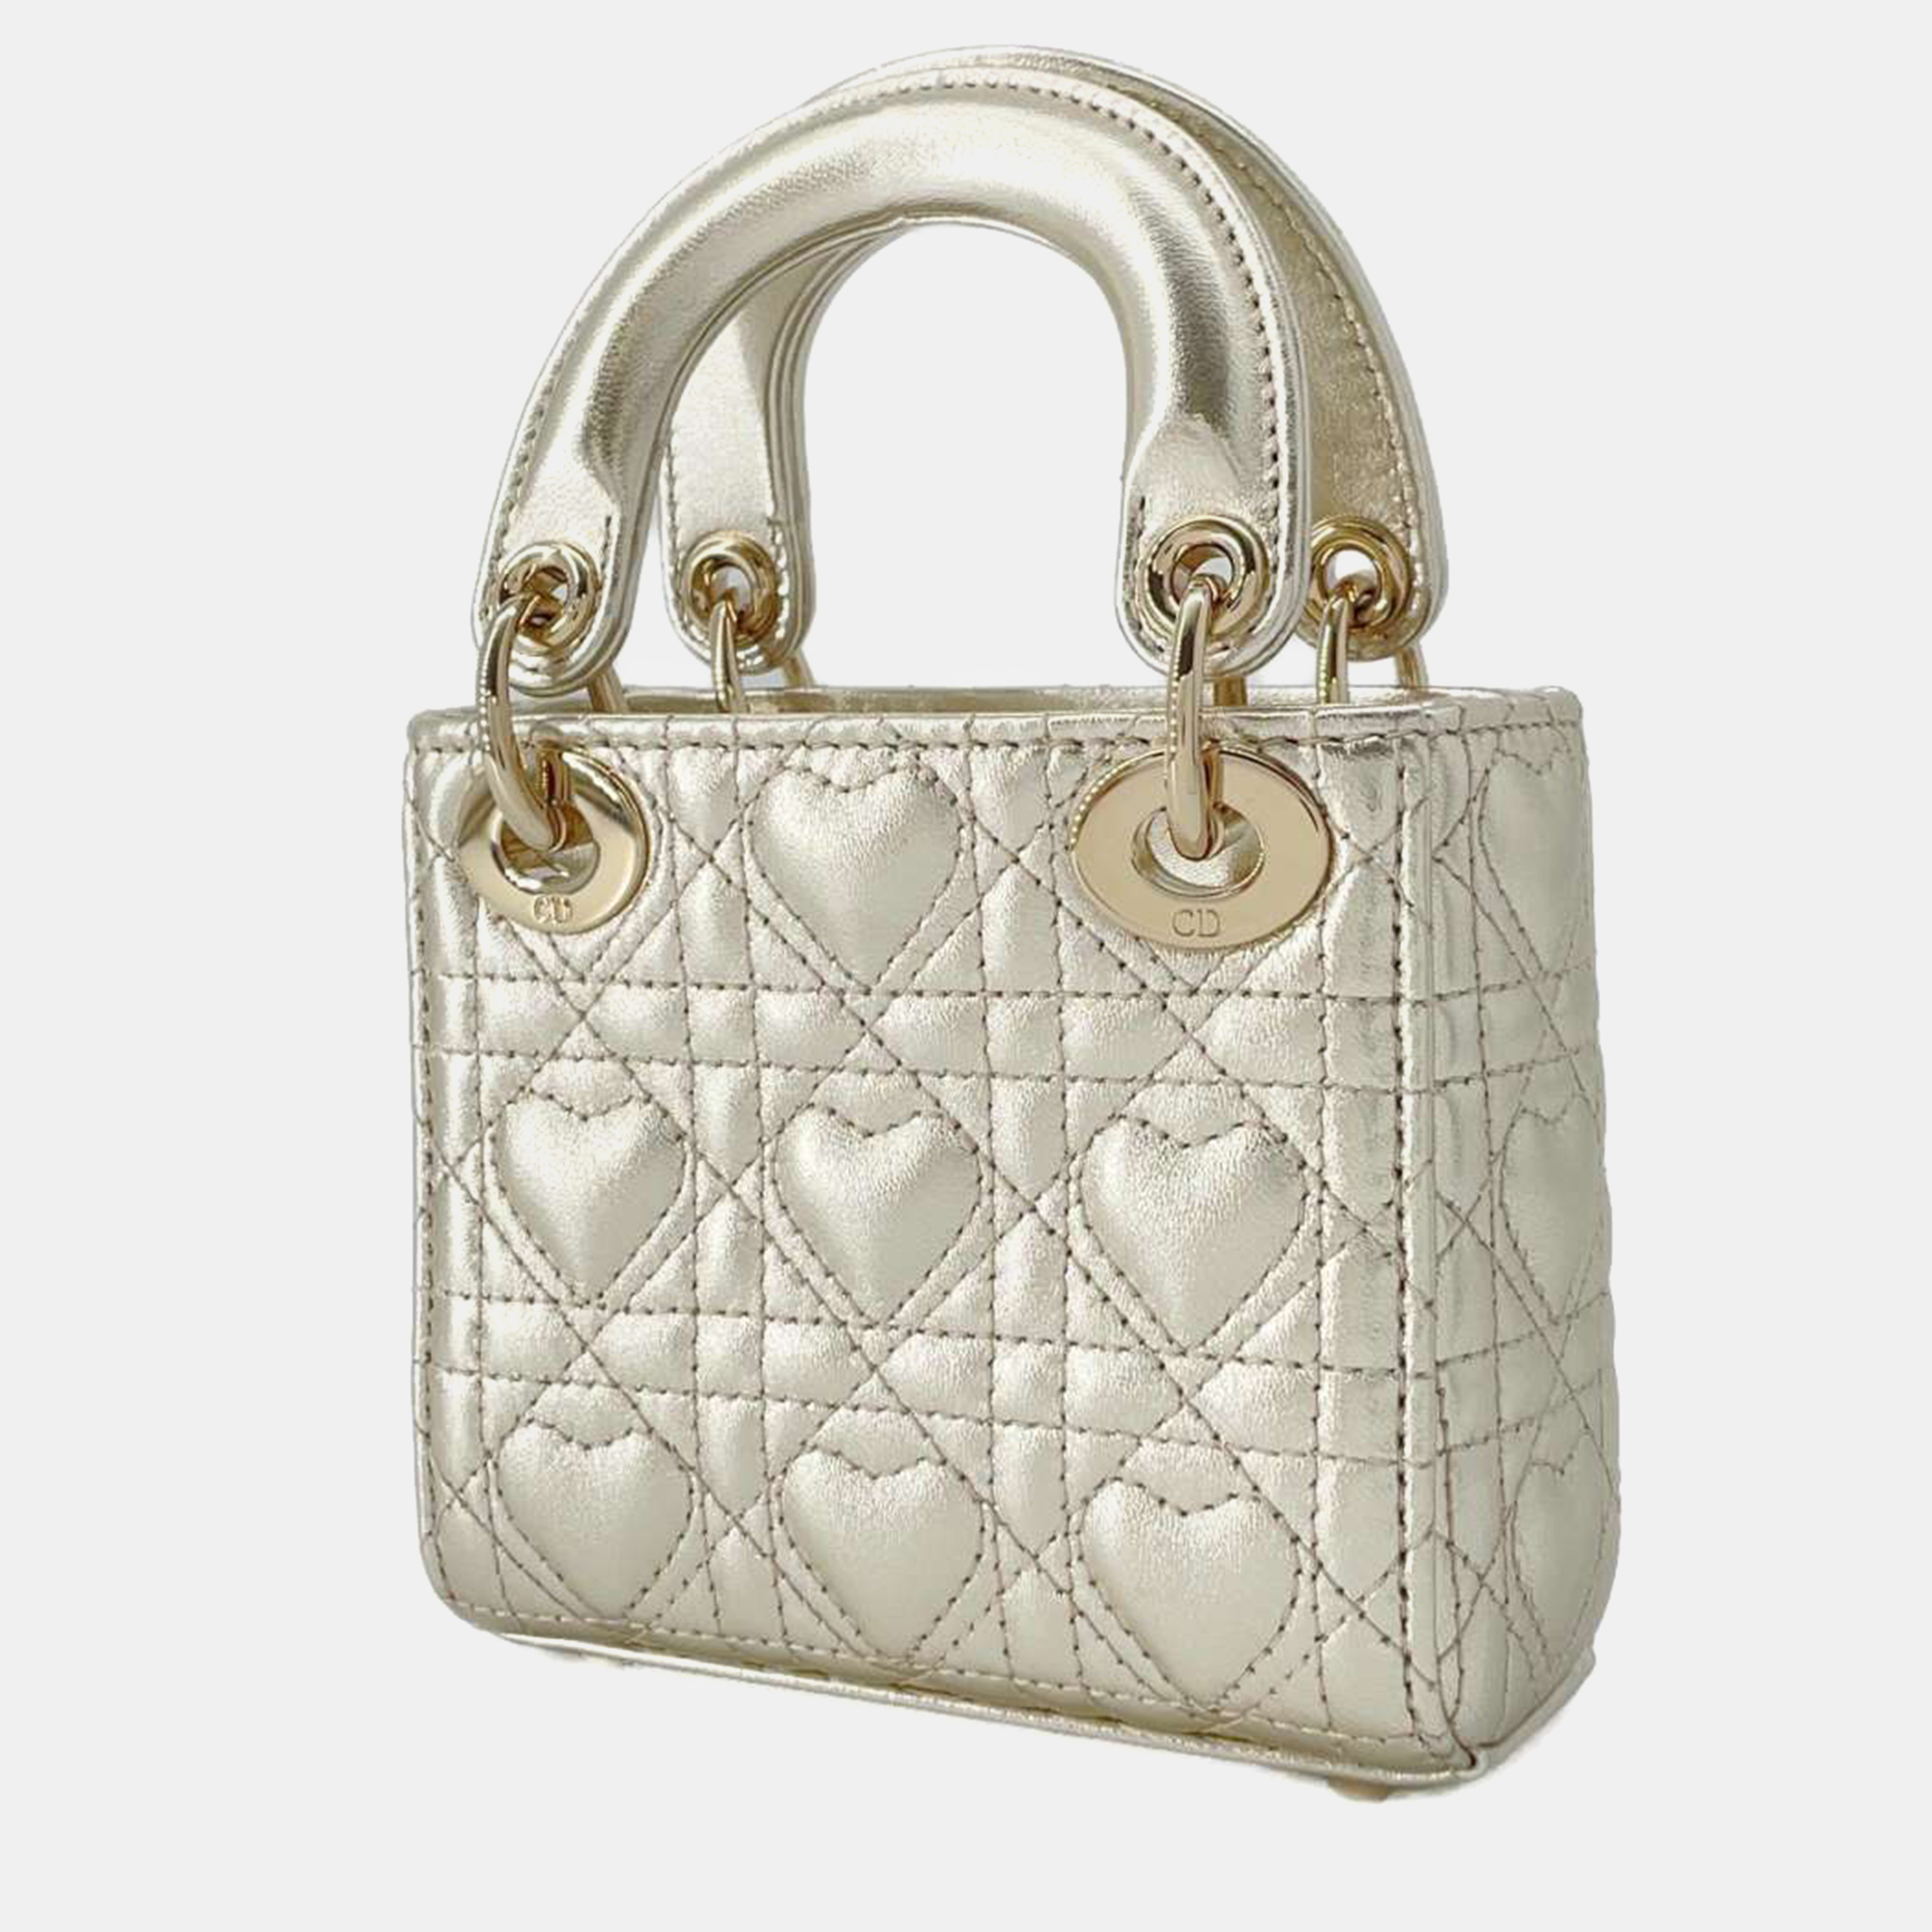 Elevate your style with an exquisite Dior bag. This timeless masterpiece is crafted from high grade materials adorned with iconic Dior motifs and features meticulous craftsmanship for luxury and sophistication.